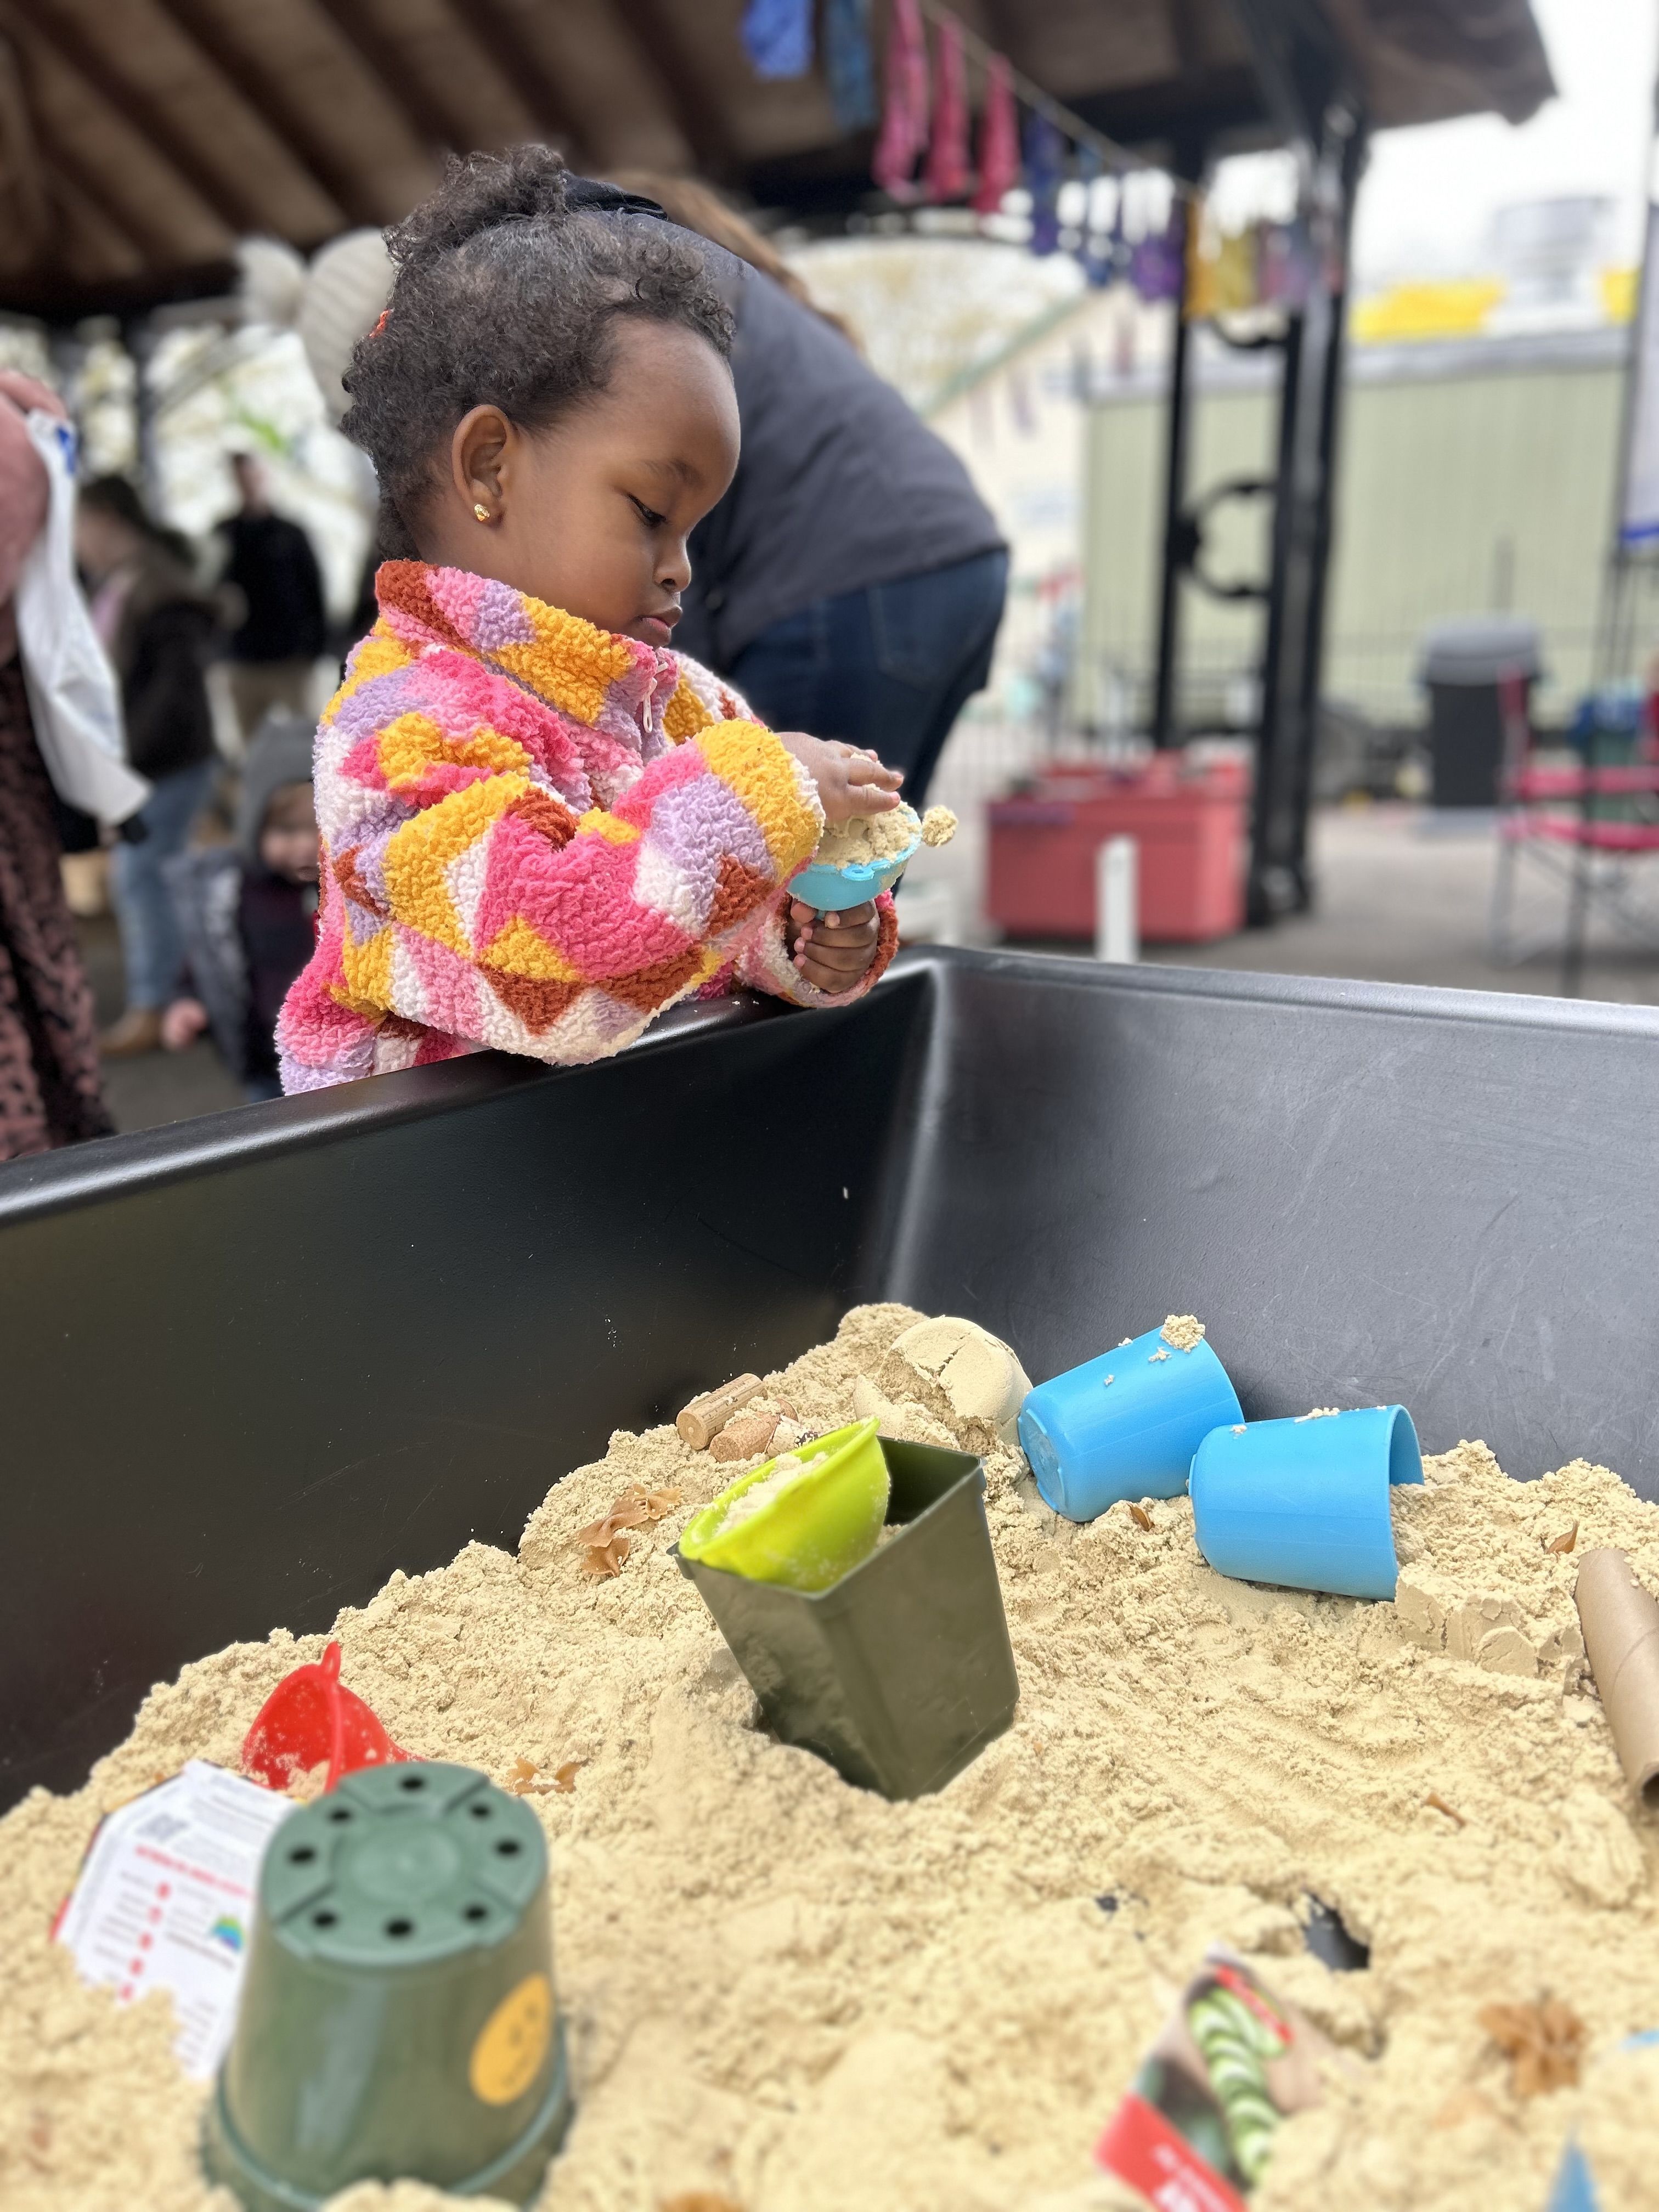 Discovering the art of sand-sational play!